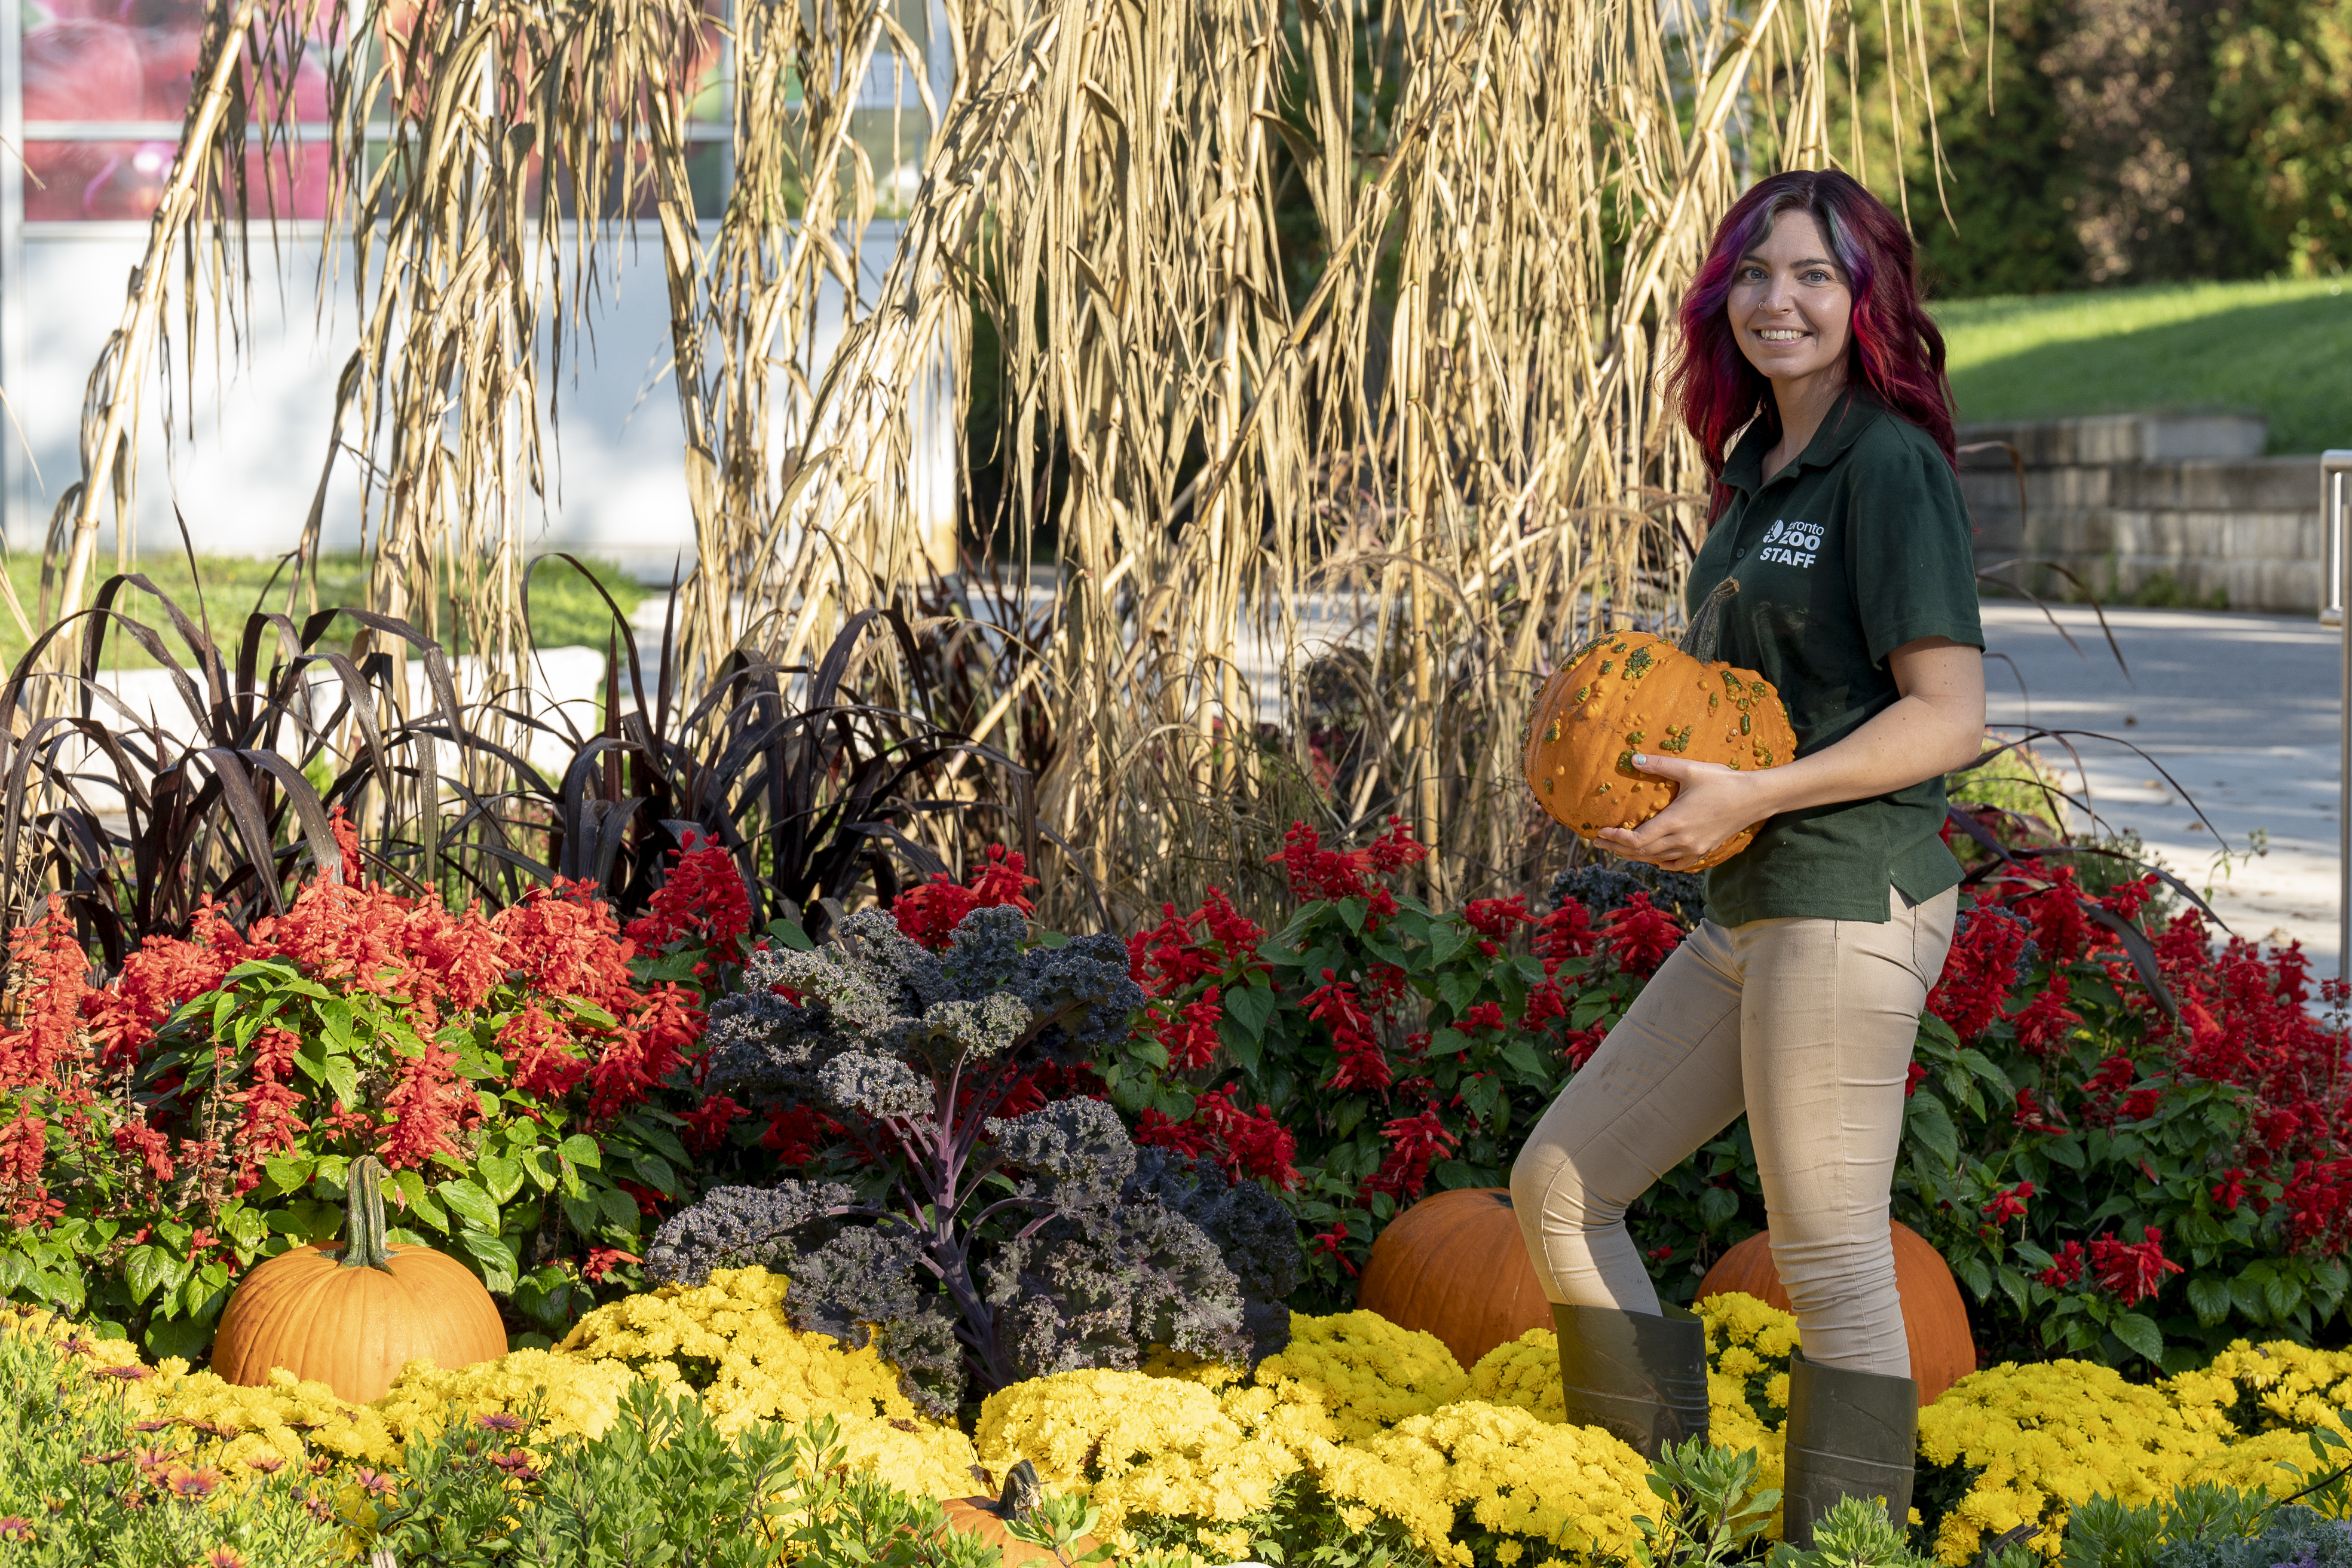 Female Toronto Zoo worker holding a pumpkin in a colourful garden.